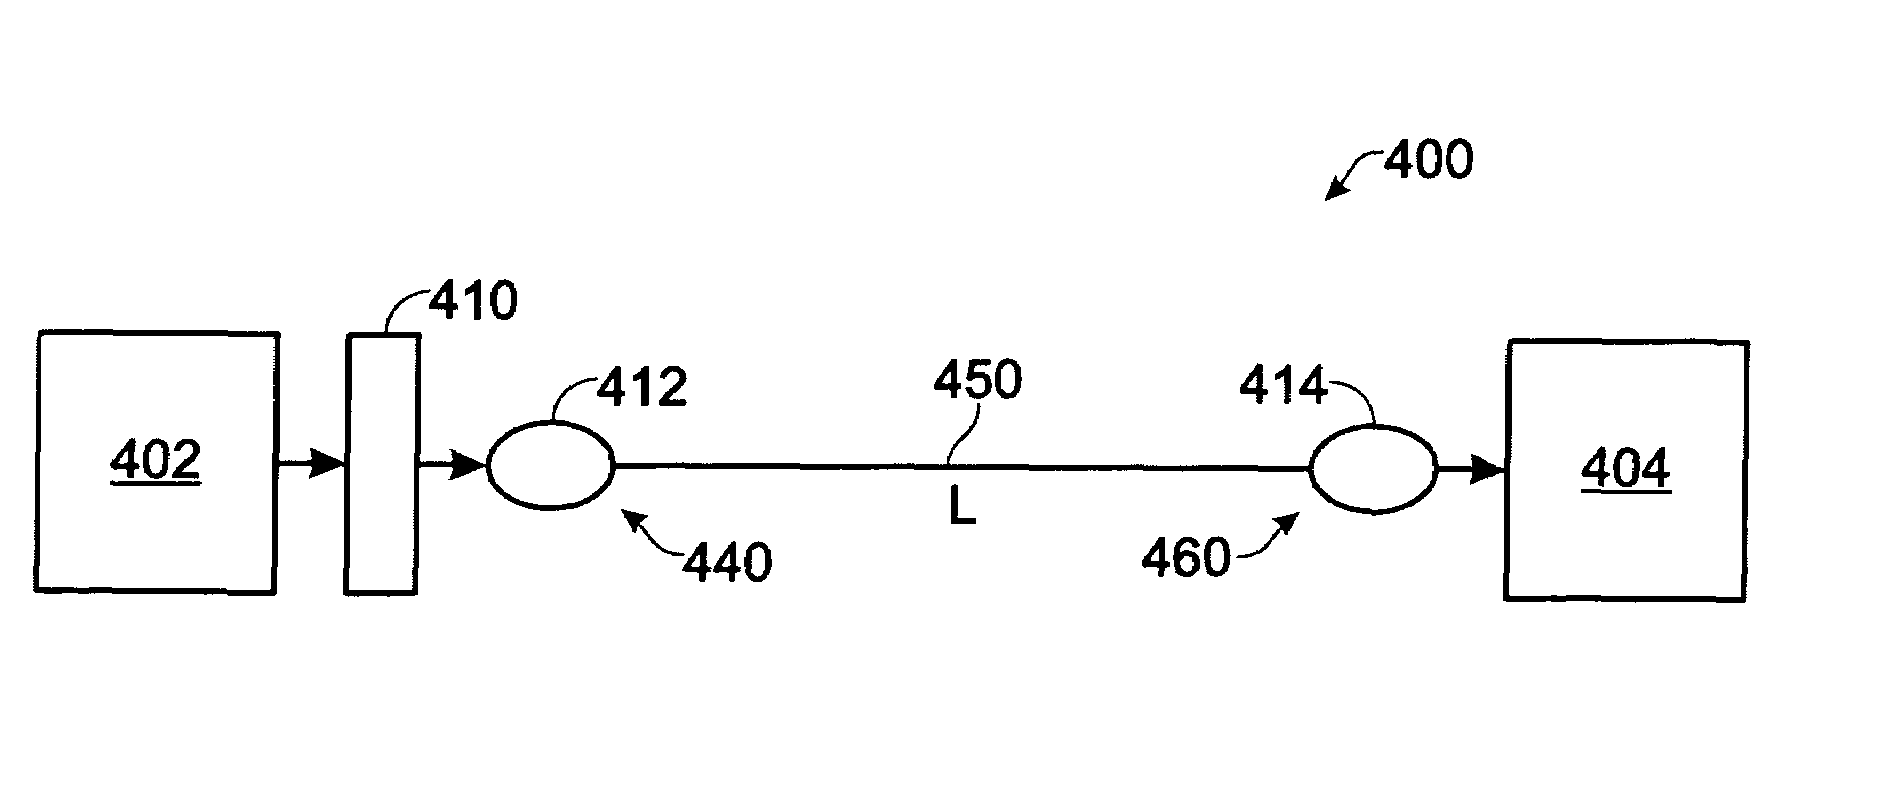 Method and apparatus for mitigation of modal dispersion effects in multimode fiber